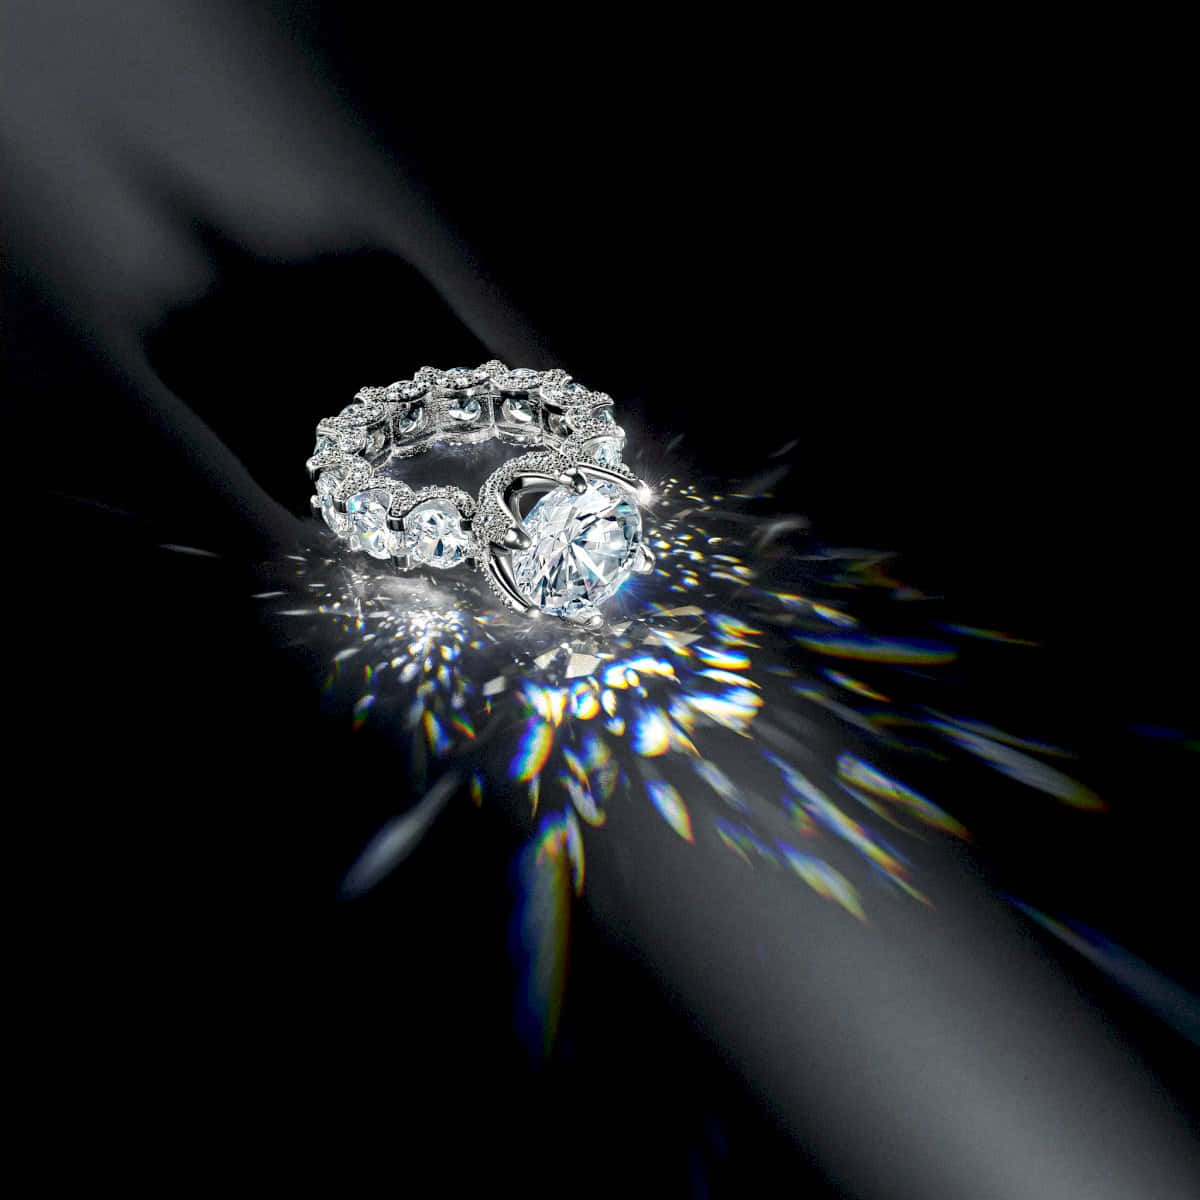 A Diamond Ring With A Light Shining Through It